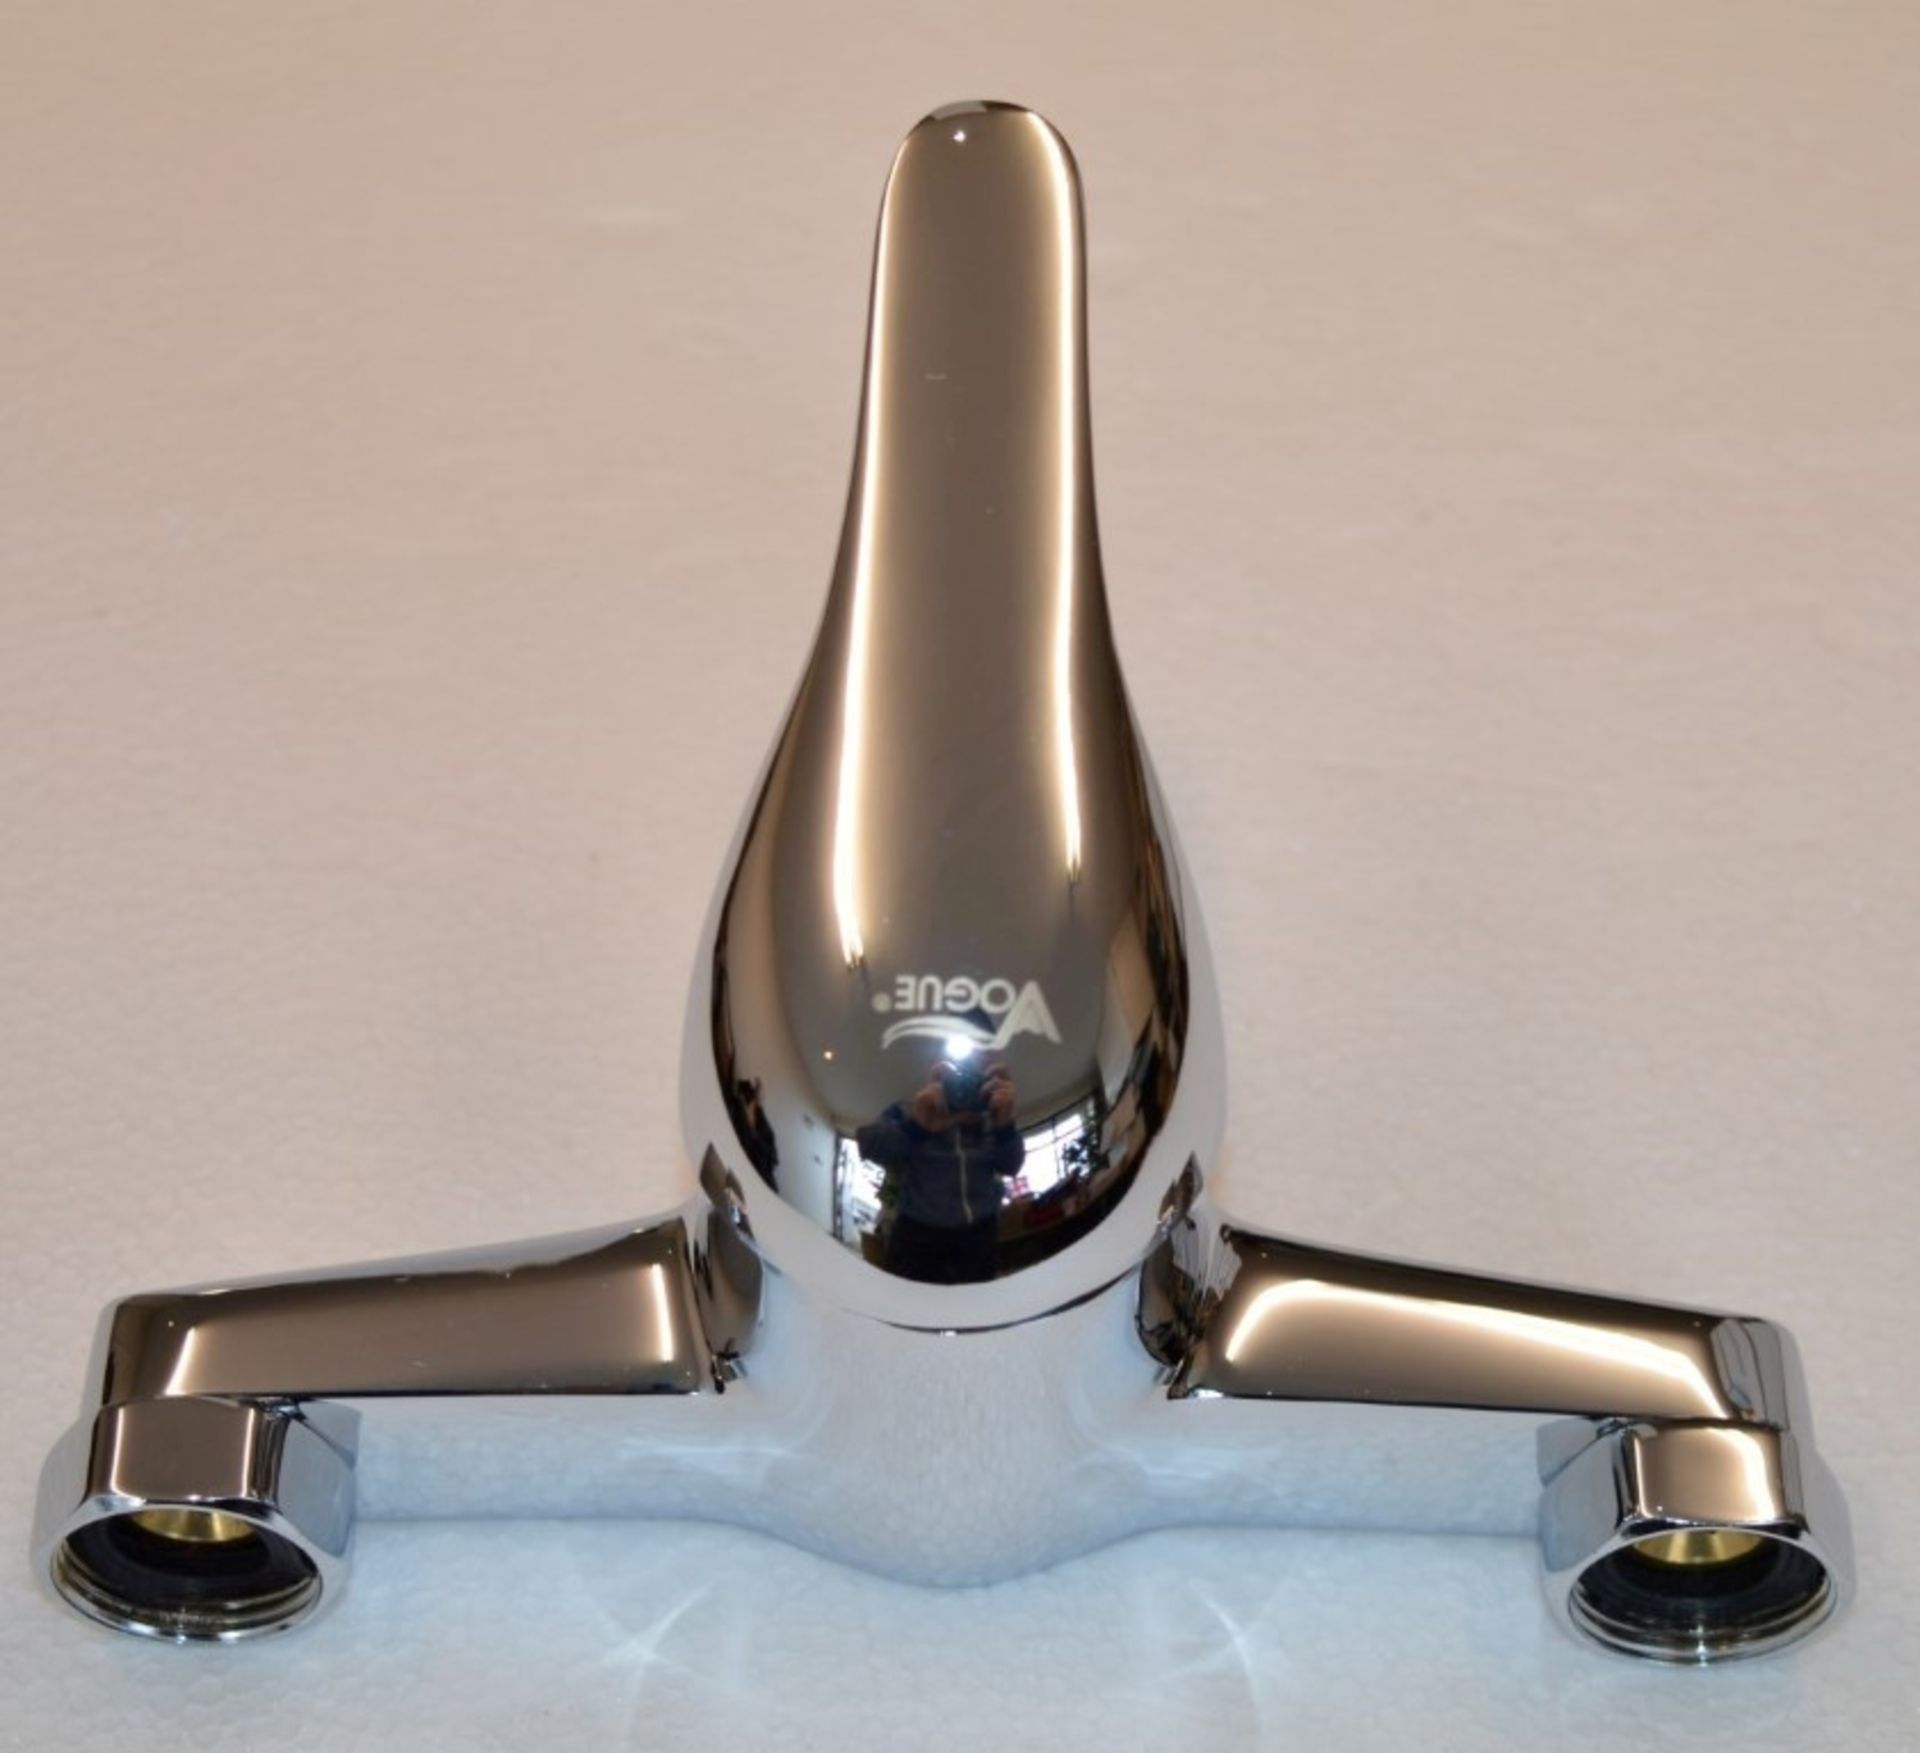 1 x Vogue Carmina Deck Mounted Bath Shower Mixer Tap - Includes Bath Mixer Tap, Shower Head and - Image 8 of 11